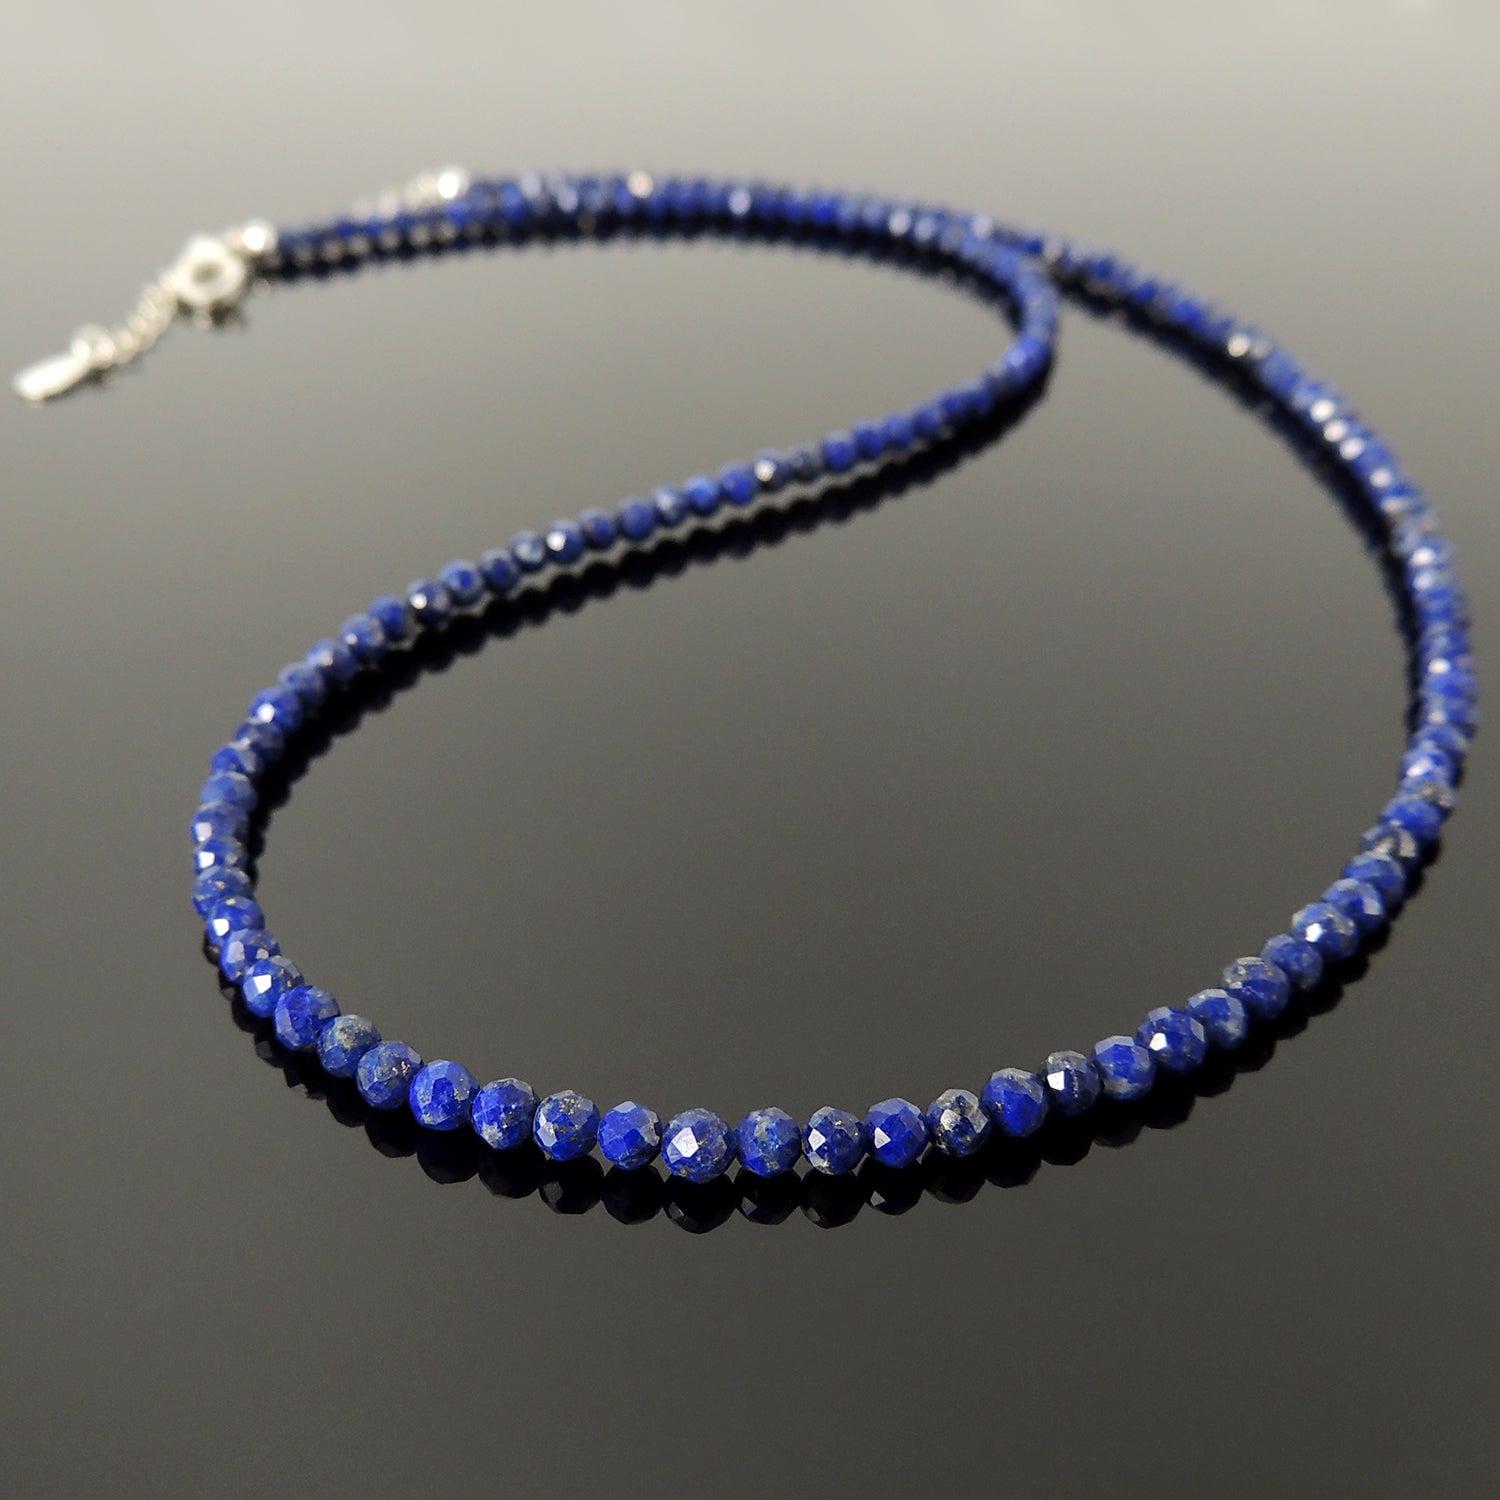 Handmade Adjustable Chain Crystal Necklace - Men's Women's Daily Wear, Awareness with Healing Natural Lapis Lazuli 3mm Faceted Beads, Genuine Non-Plated S925 Sterling Silver Clasp NK256